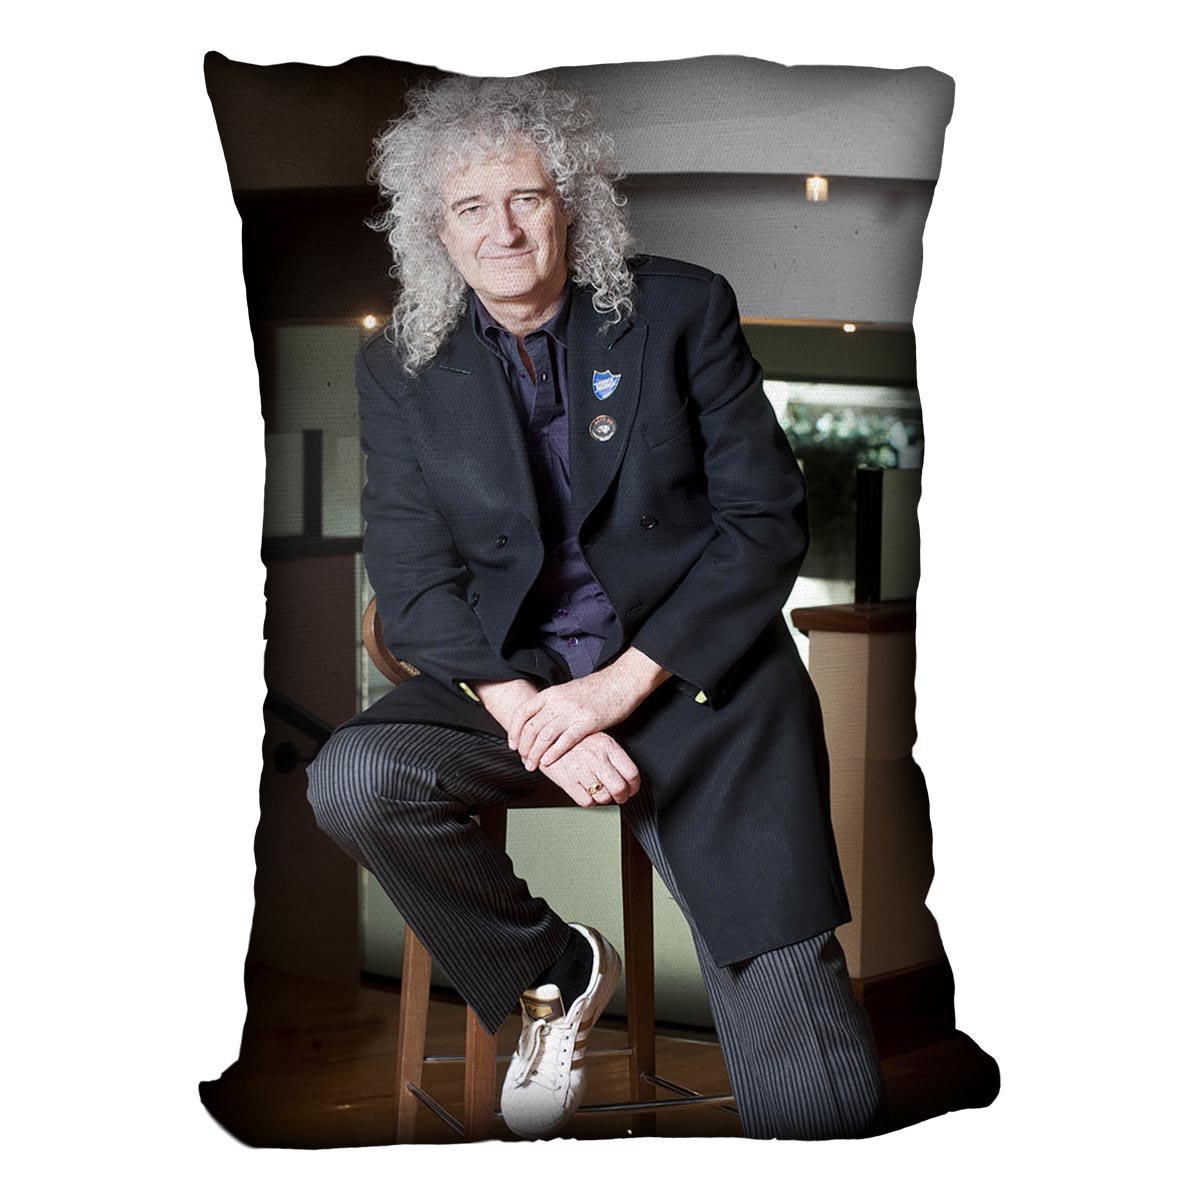 Guitarist Brian May of Queen Cushion